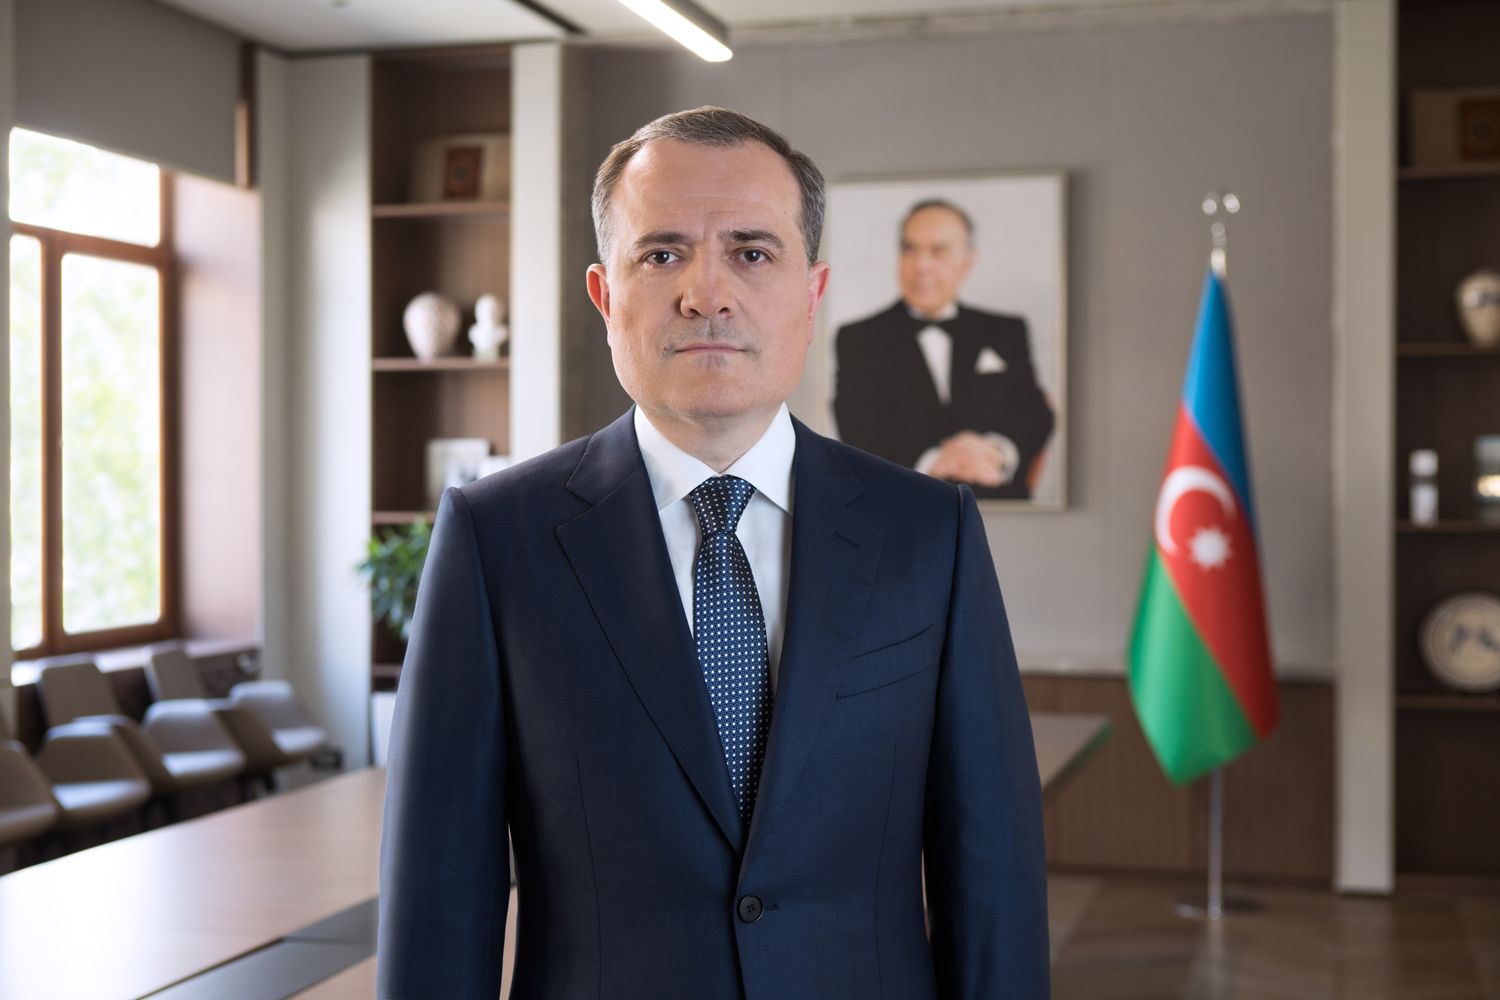 Azerbaijan's Foreign Ministry condemns burning of Koran in Sweden